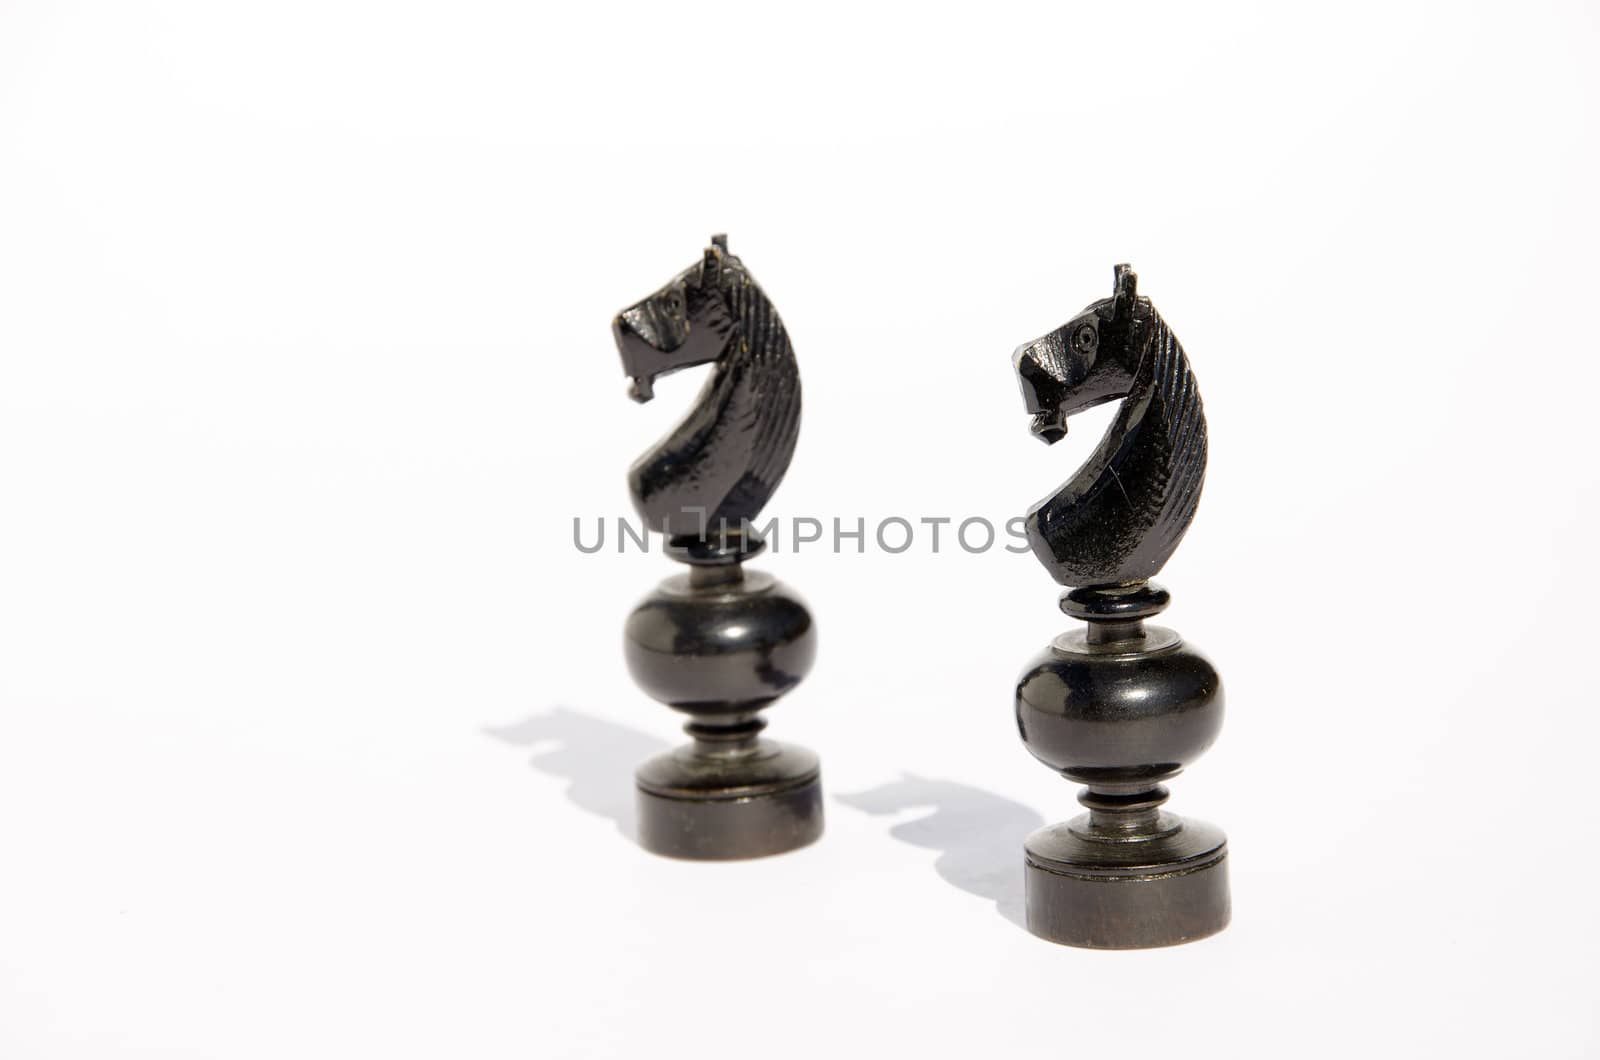 Few chess figures - horse isolated on a white background.